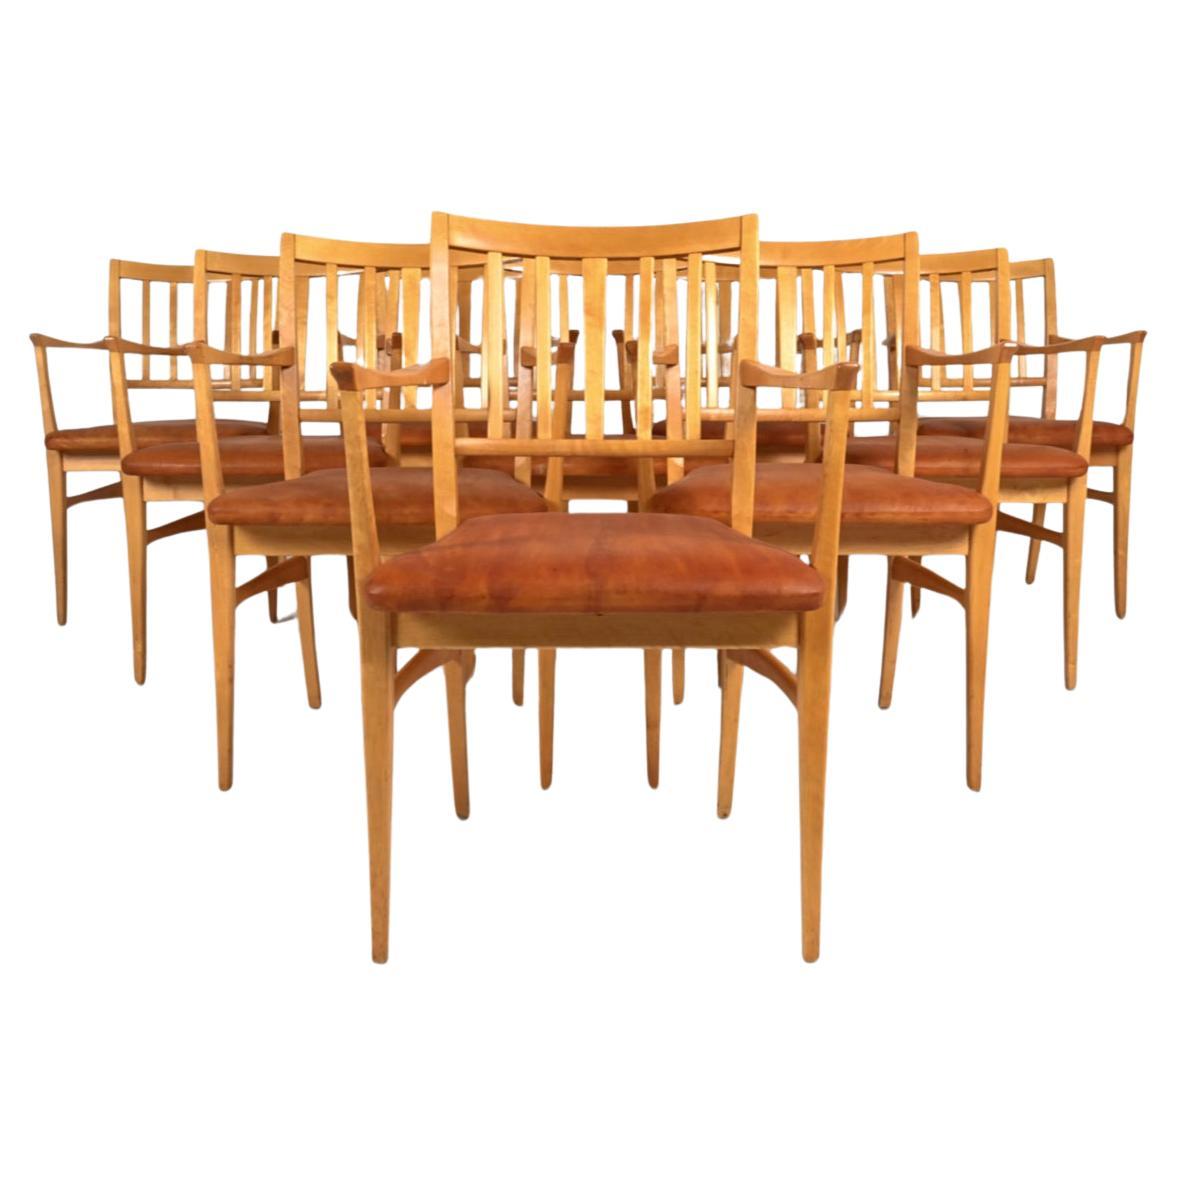 (10) Swedish Mid Century Modern slat back dining chairs designed by Carl Malmsten. Solid birch frames with leather upholstery that has a dyed finish. Very sturdy simple set of Swedish modern dining chairs. Sold as a set of ten chairs. Located in